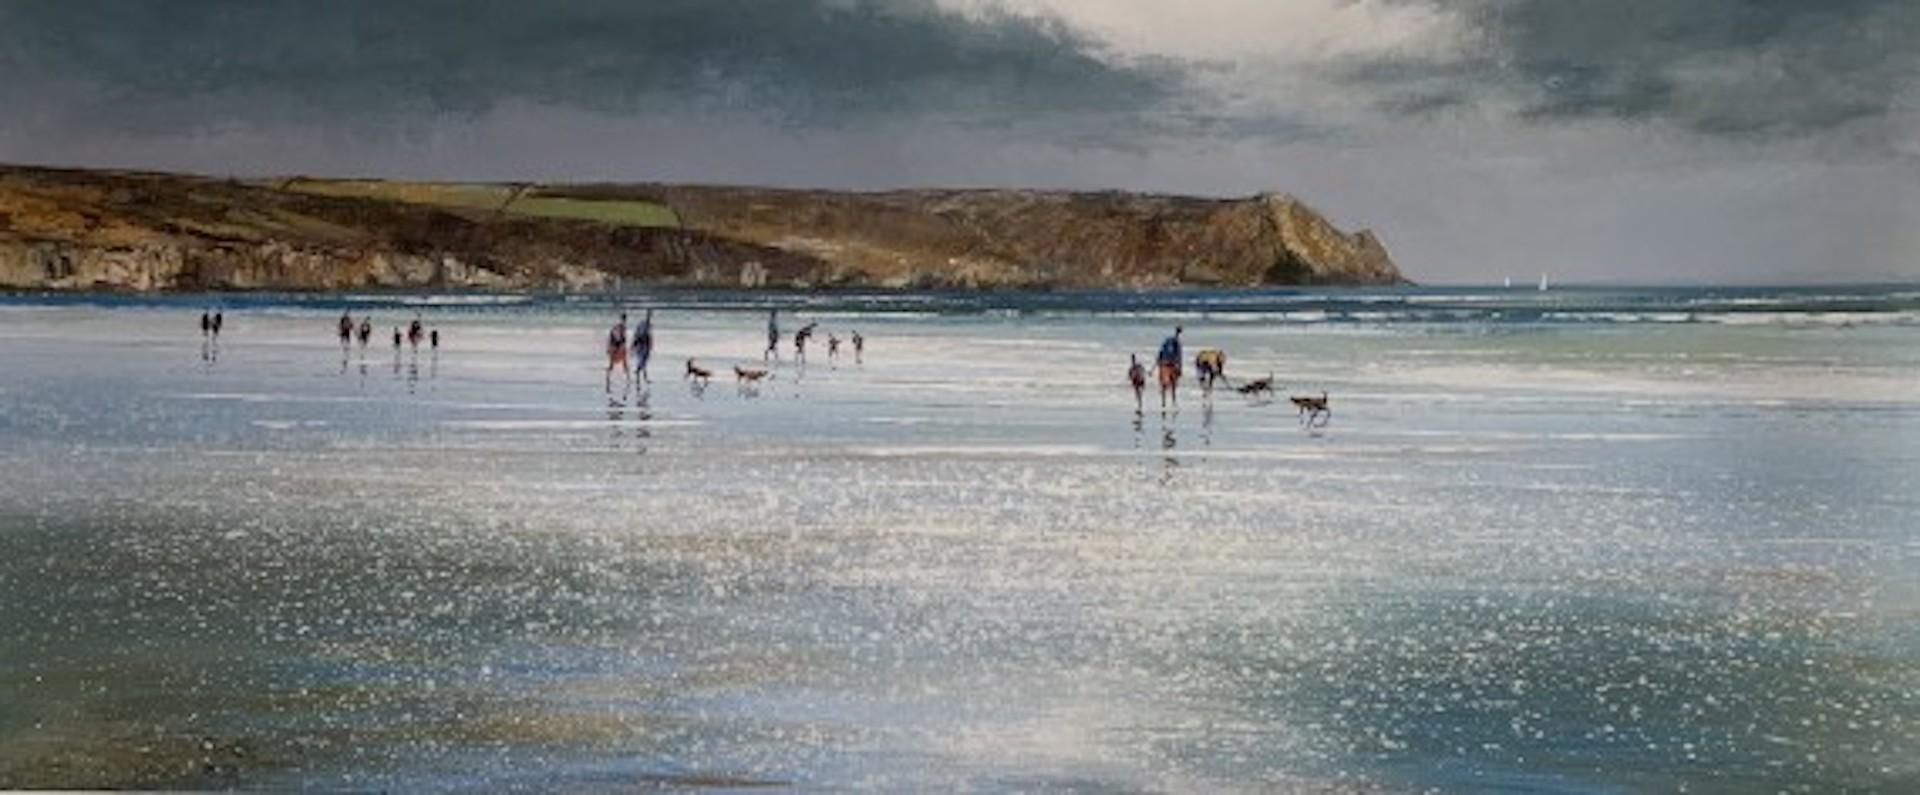 Nare Head, Carne Beach By Michael Sanders [2021]
limited_edition

Giclée print

Edition number 50

Image size: H:50 cm x W:120 cm

Complete Size of Unframed Work: H:60 cm x W:130.5 cm x D:0.1cm

Sold Unframed

Please note that insitu images are